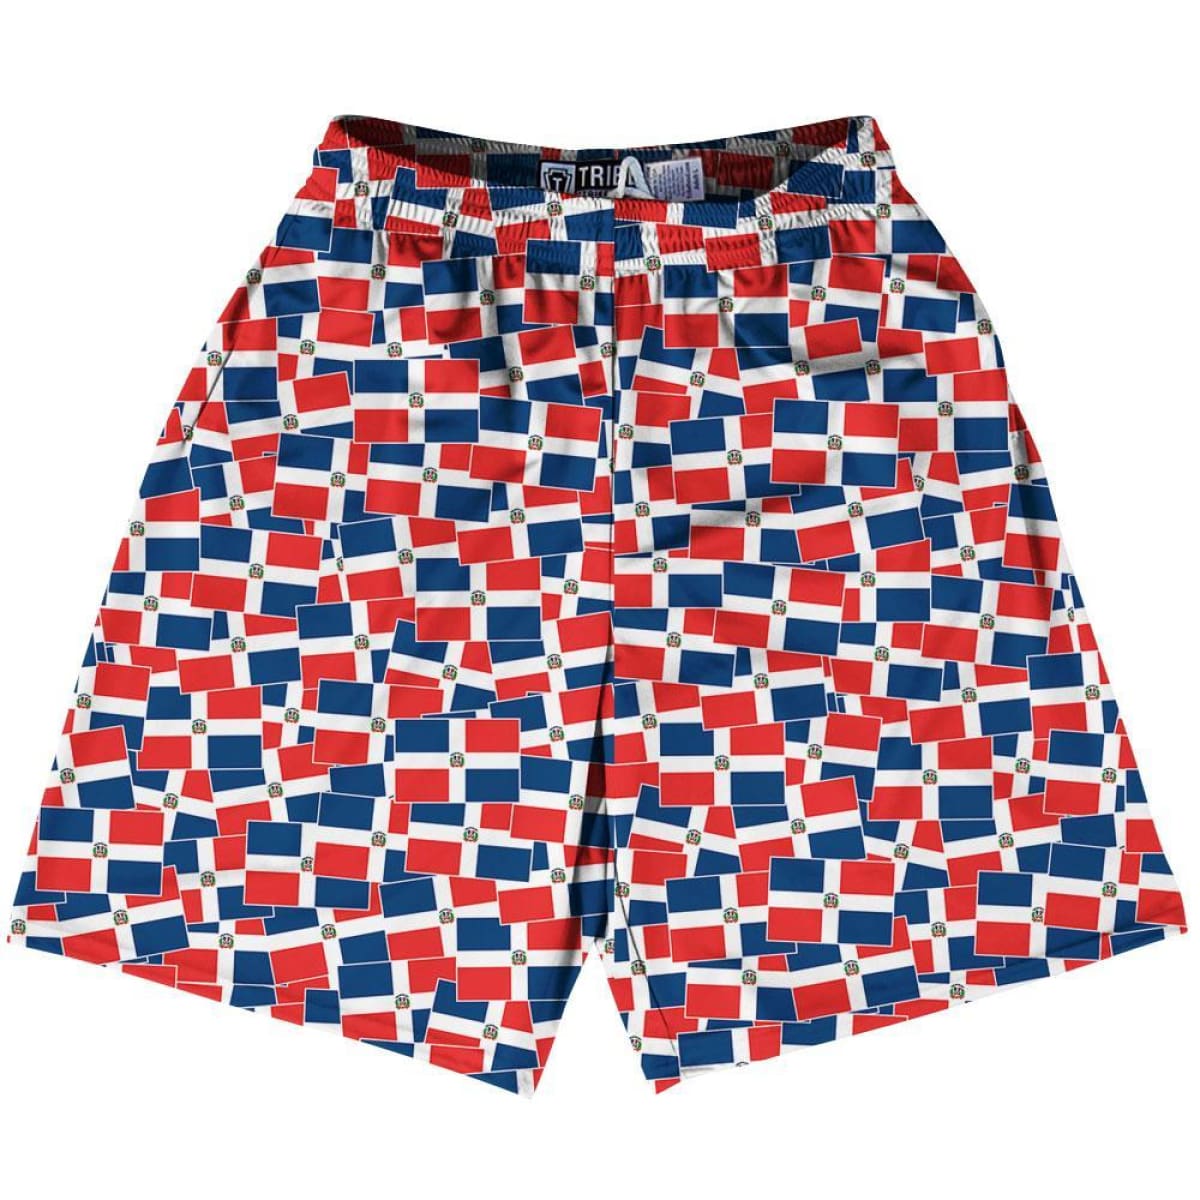 Tribe Dominican Republic Party Flags Lacrosse Shorts for Sale | Tribe ...